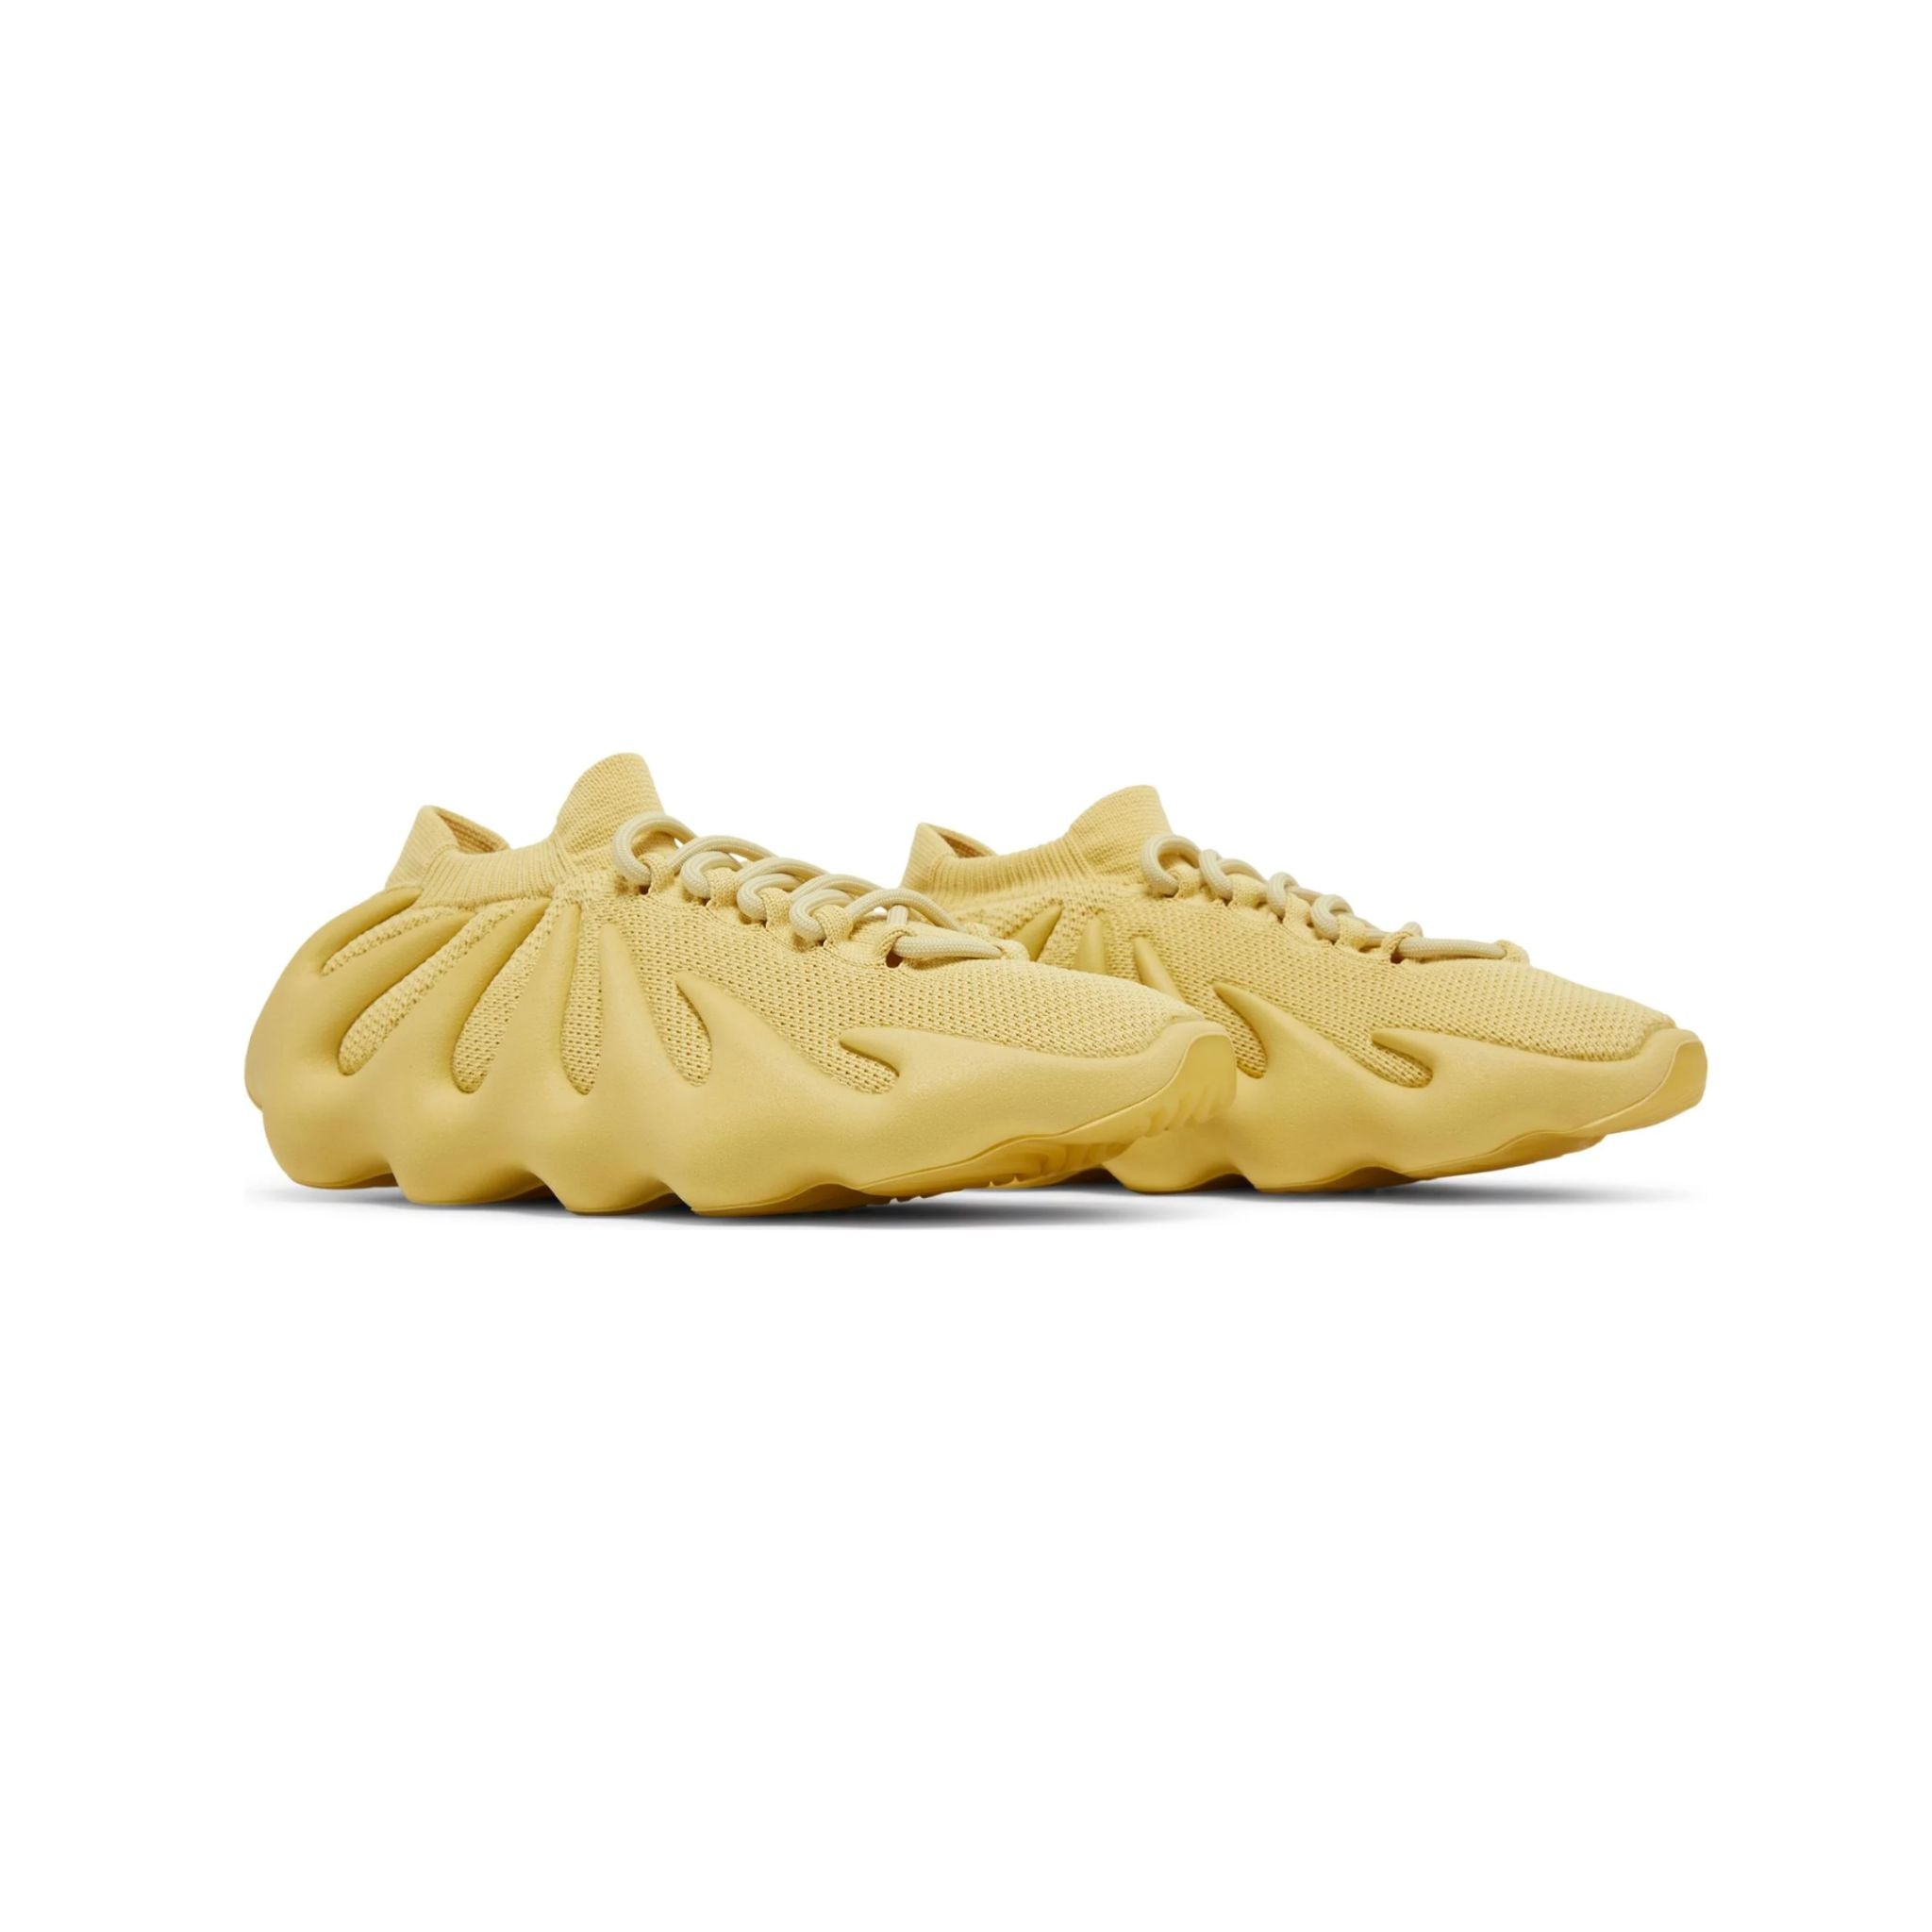 YEEZY 450 'SULFUR' – The Superior Shop